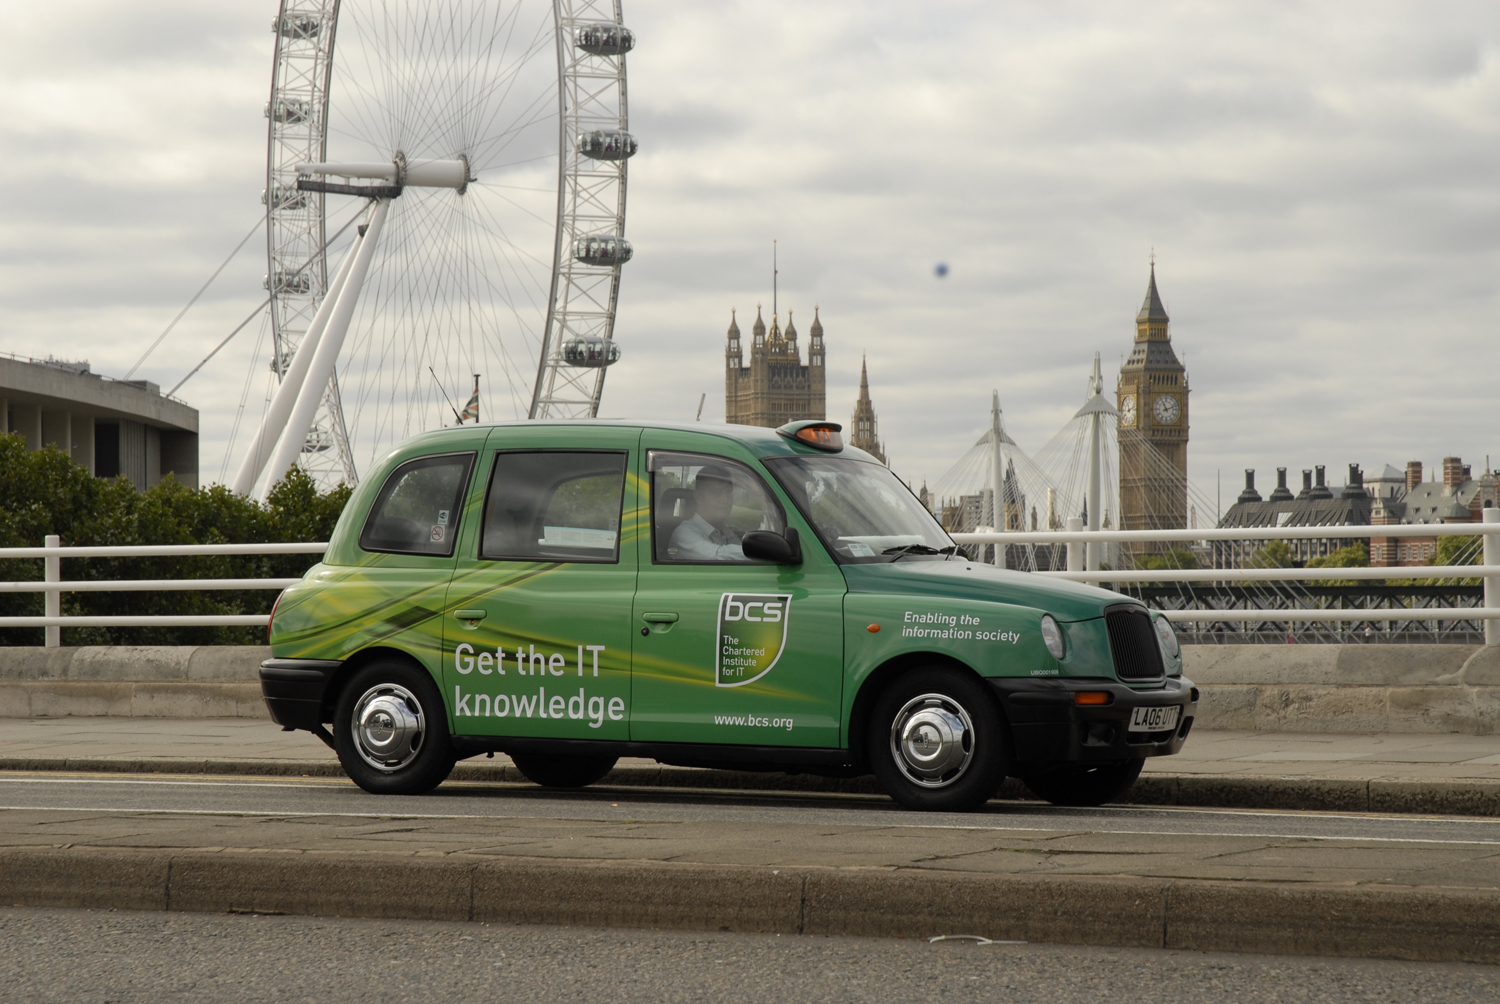 2009 Ubiquitous taxi advertising campaign for British Computer Society - Get the IT Knowledge